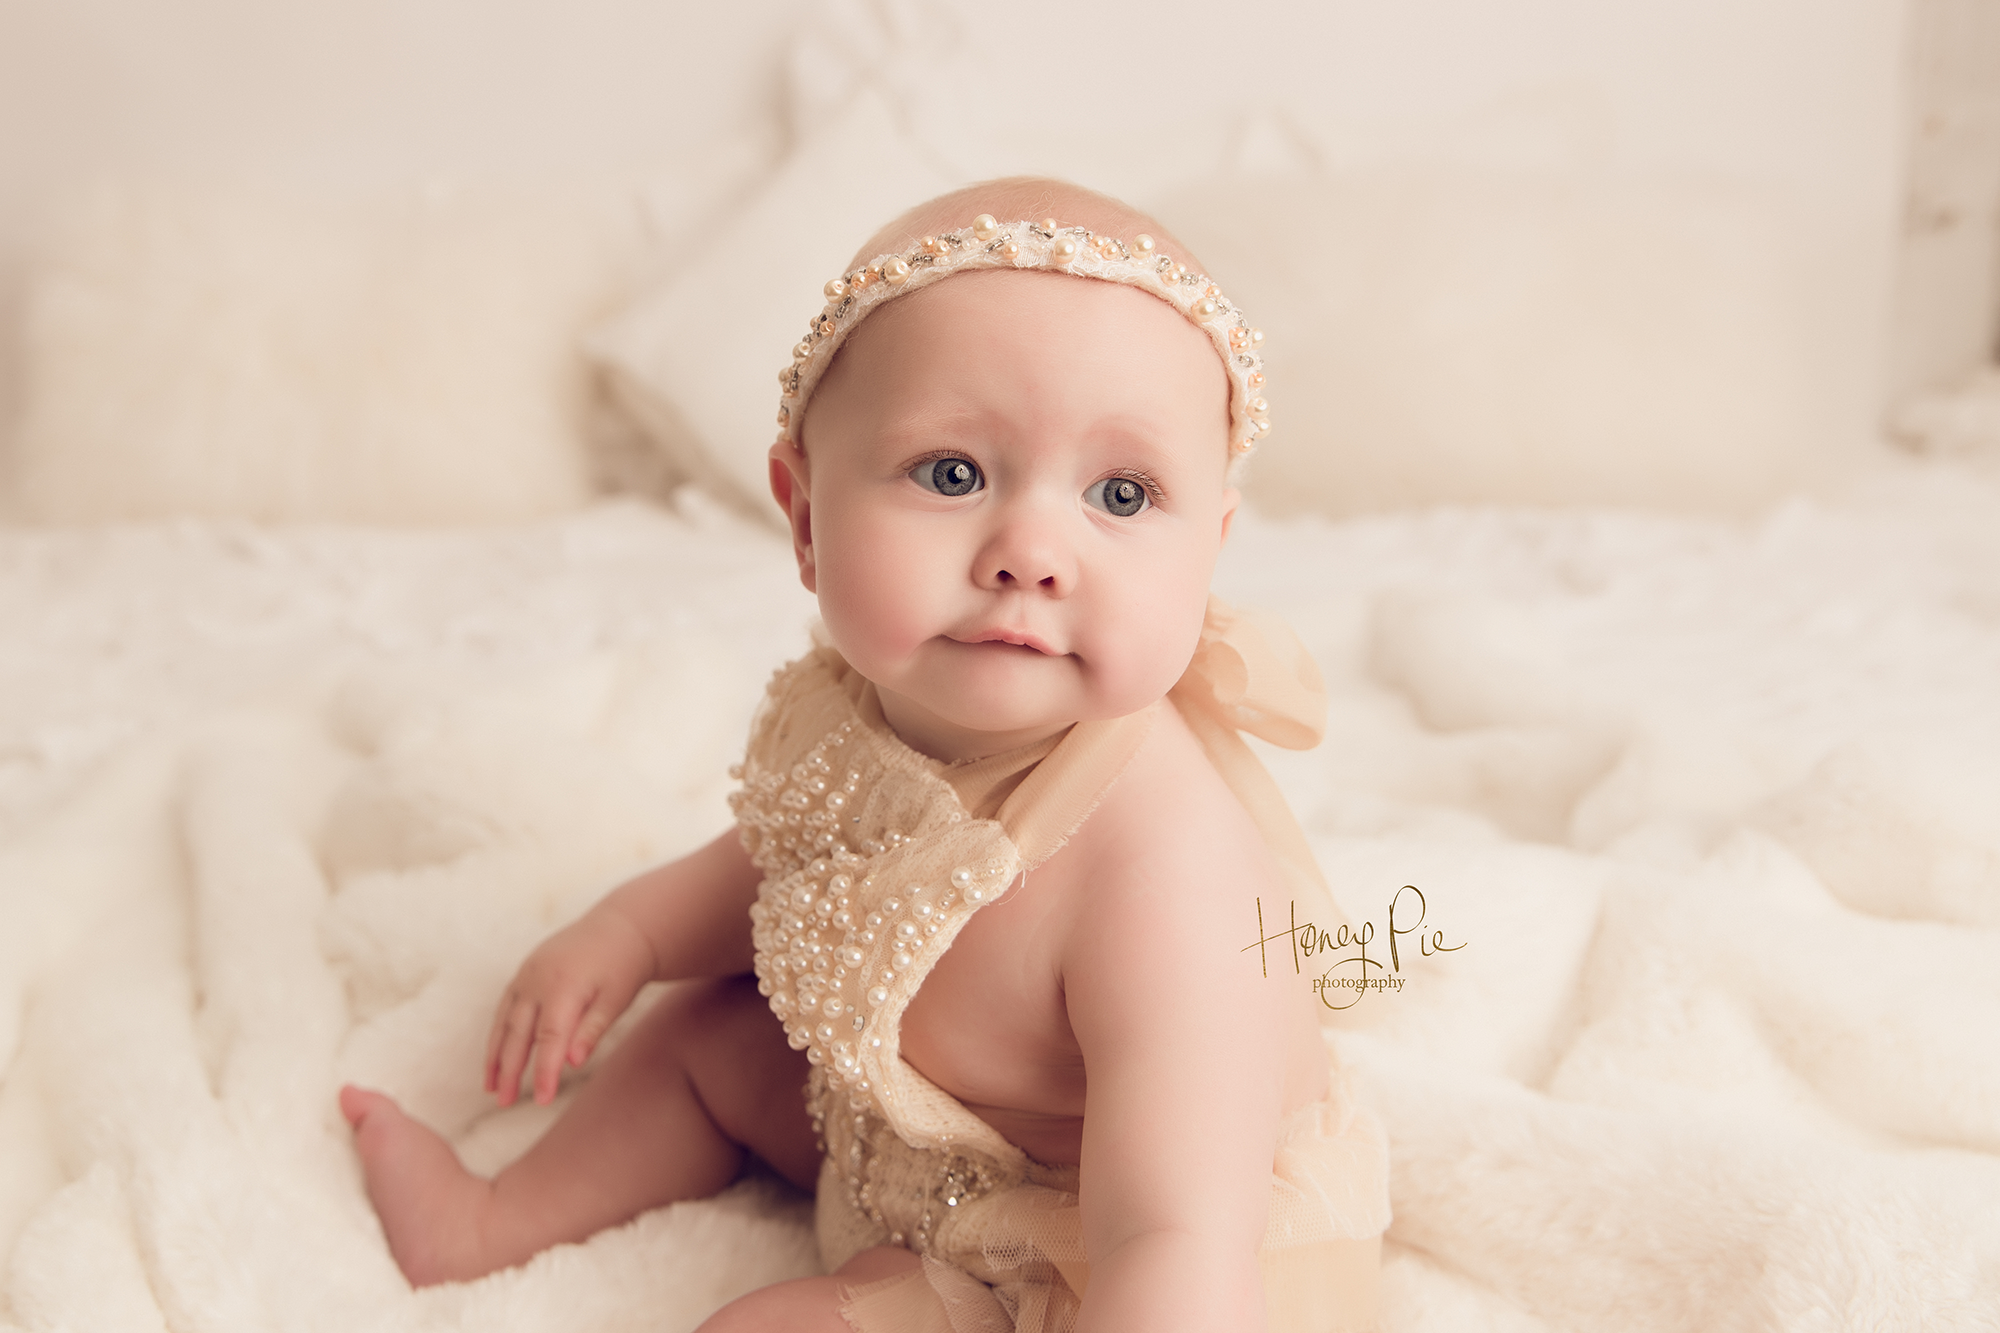 Baby girl wearing a pearl romper suit gazing off camera during her baby photoshoot